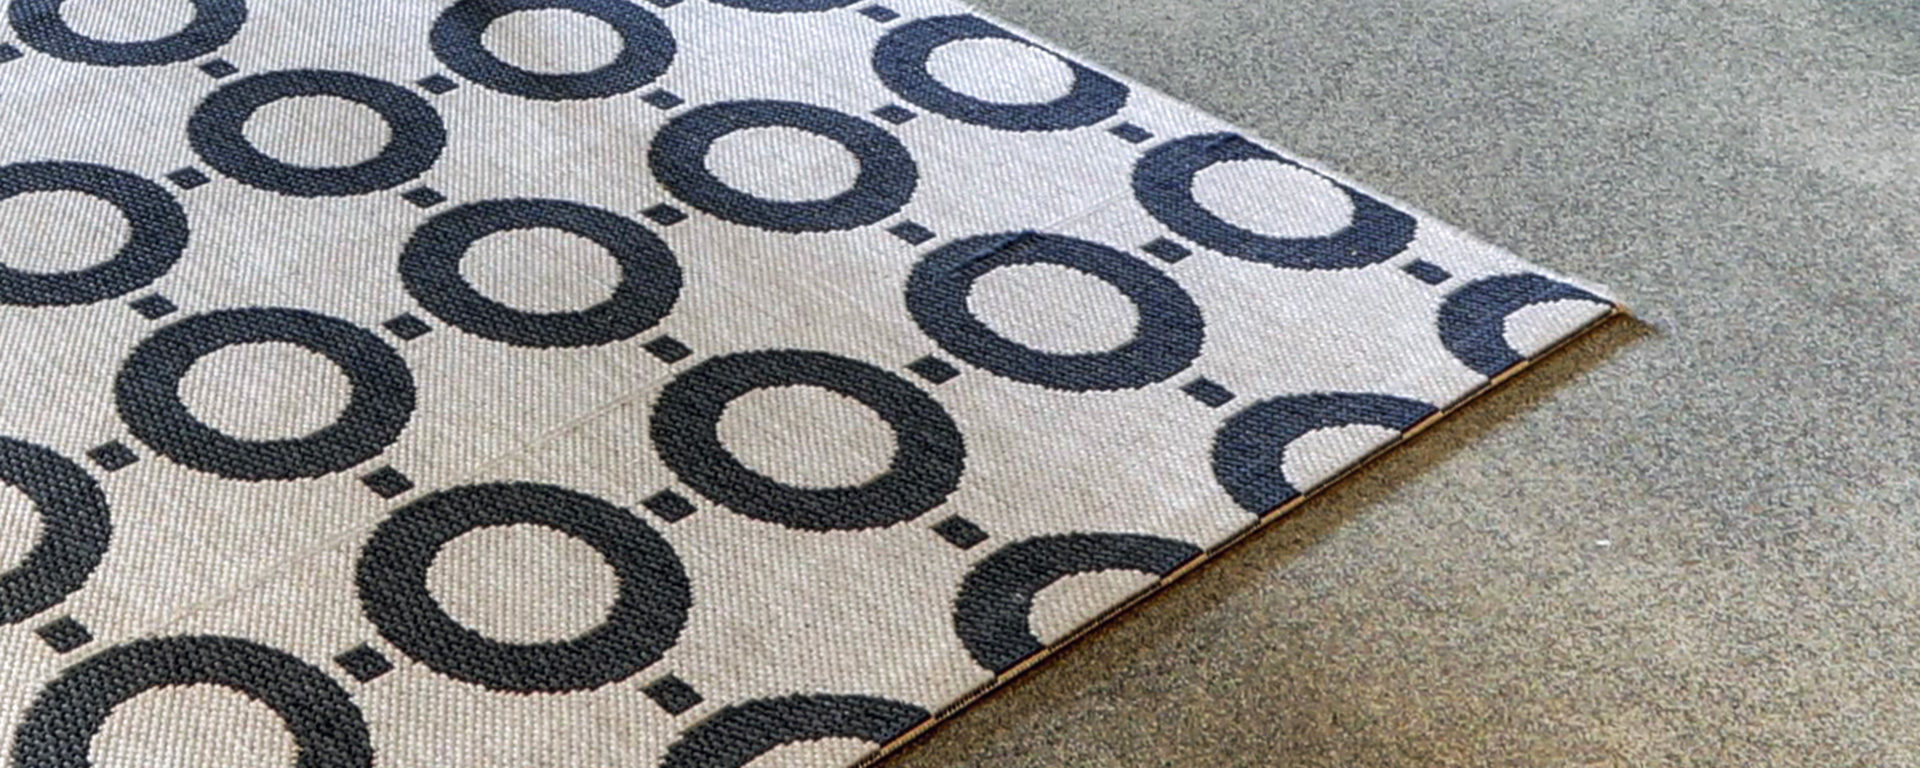 Outdoor Rug For Your Deck, Does Ruggable Make Outdoor Rugs